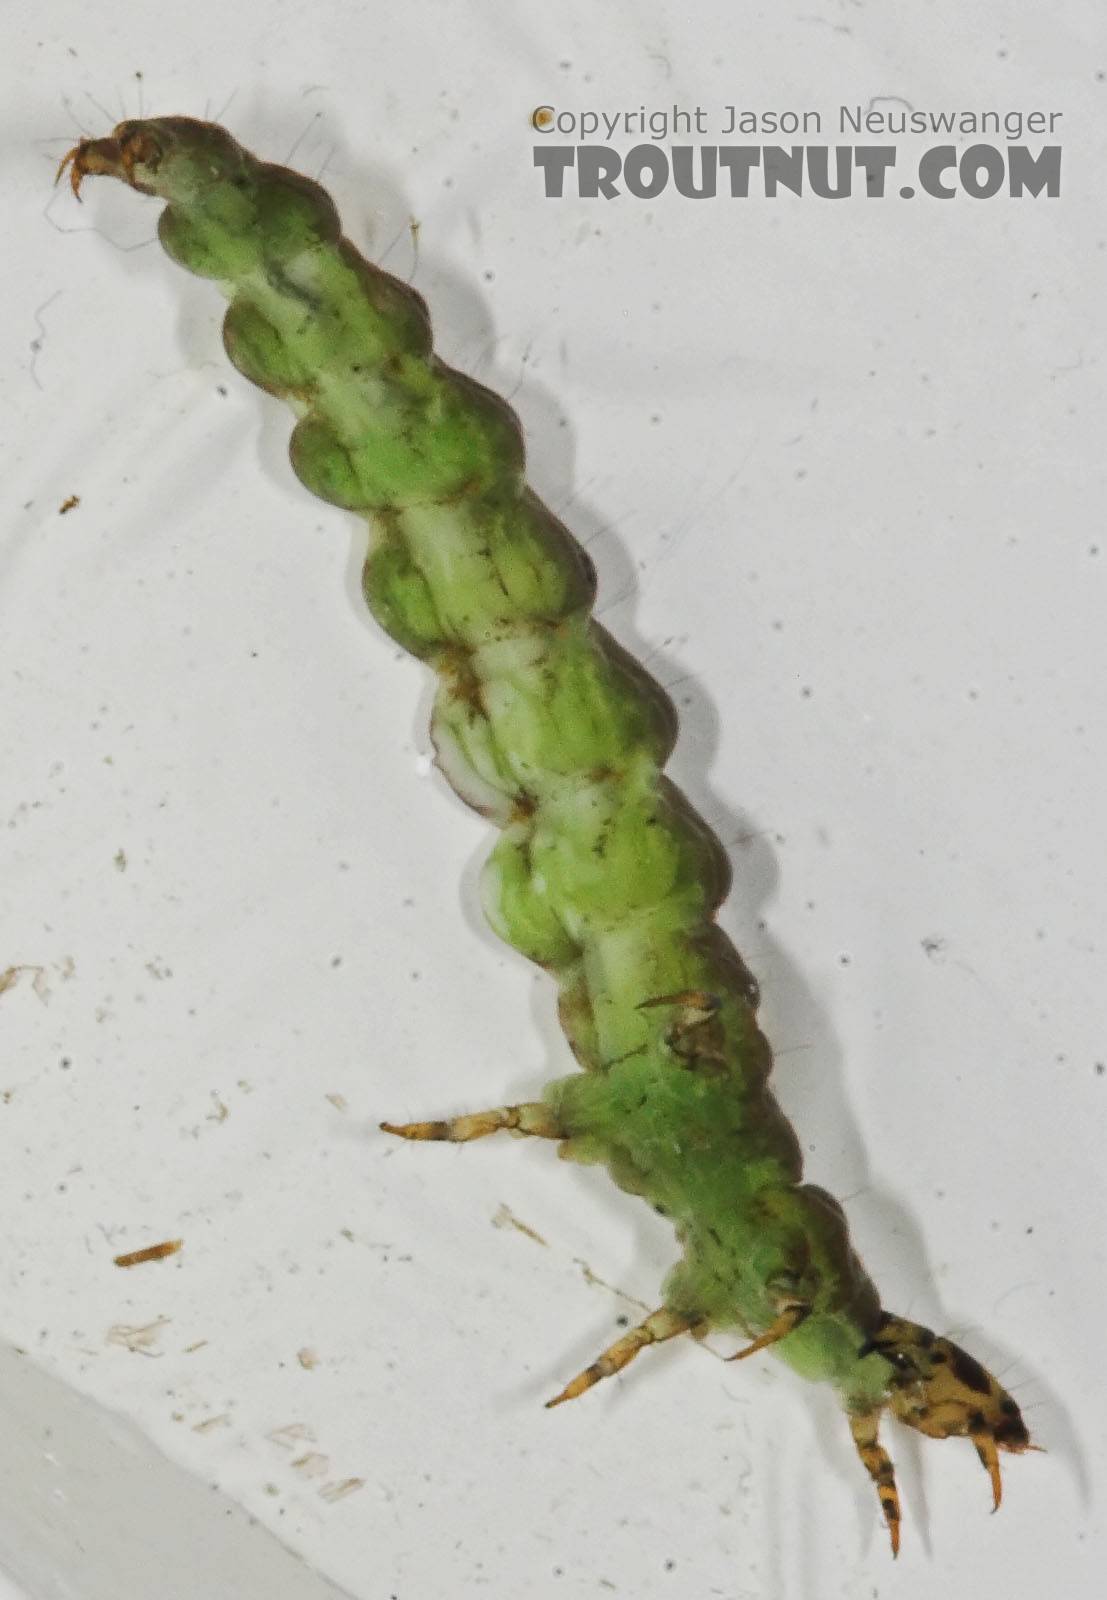 Rhyacophila fuscula (Green Sedge) Caddisfly Larva from the Long Lake Branch of the White River in Wisconsin